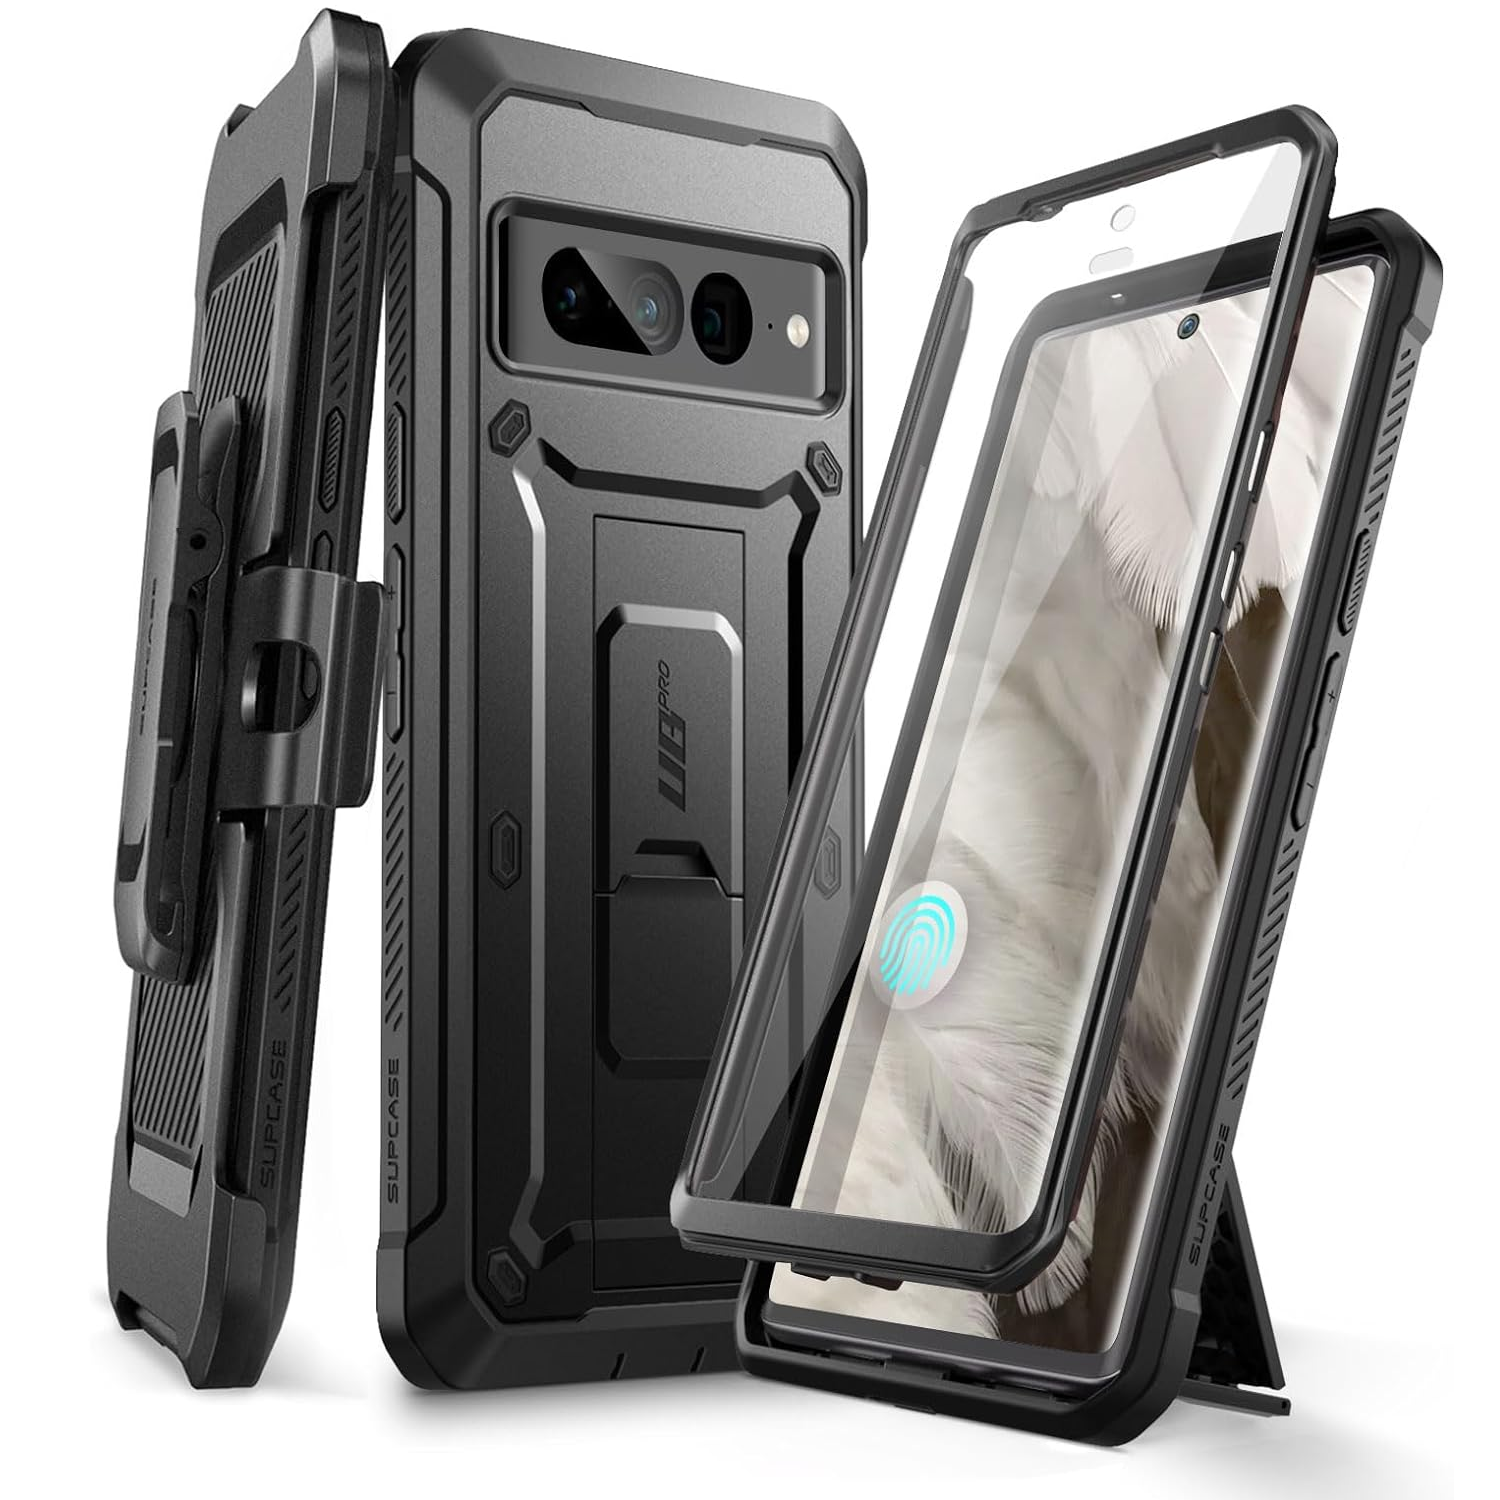 supcase unicorn beetle pro pixel 8, front, side, and back views